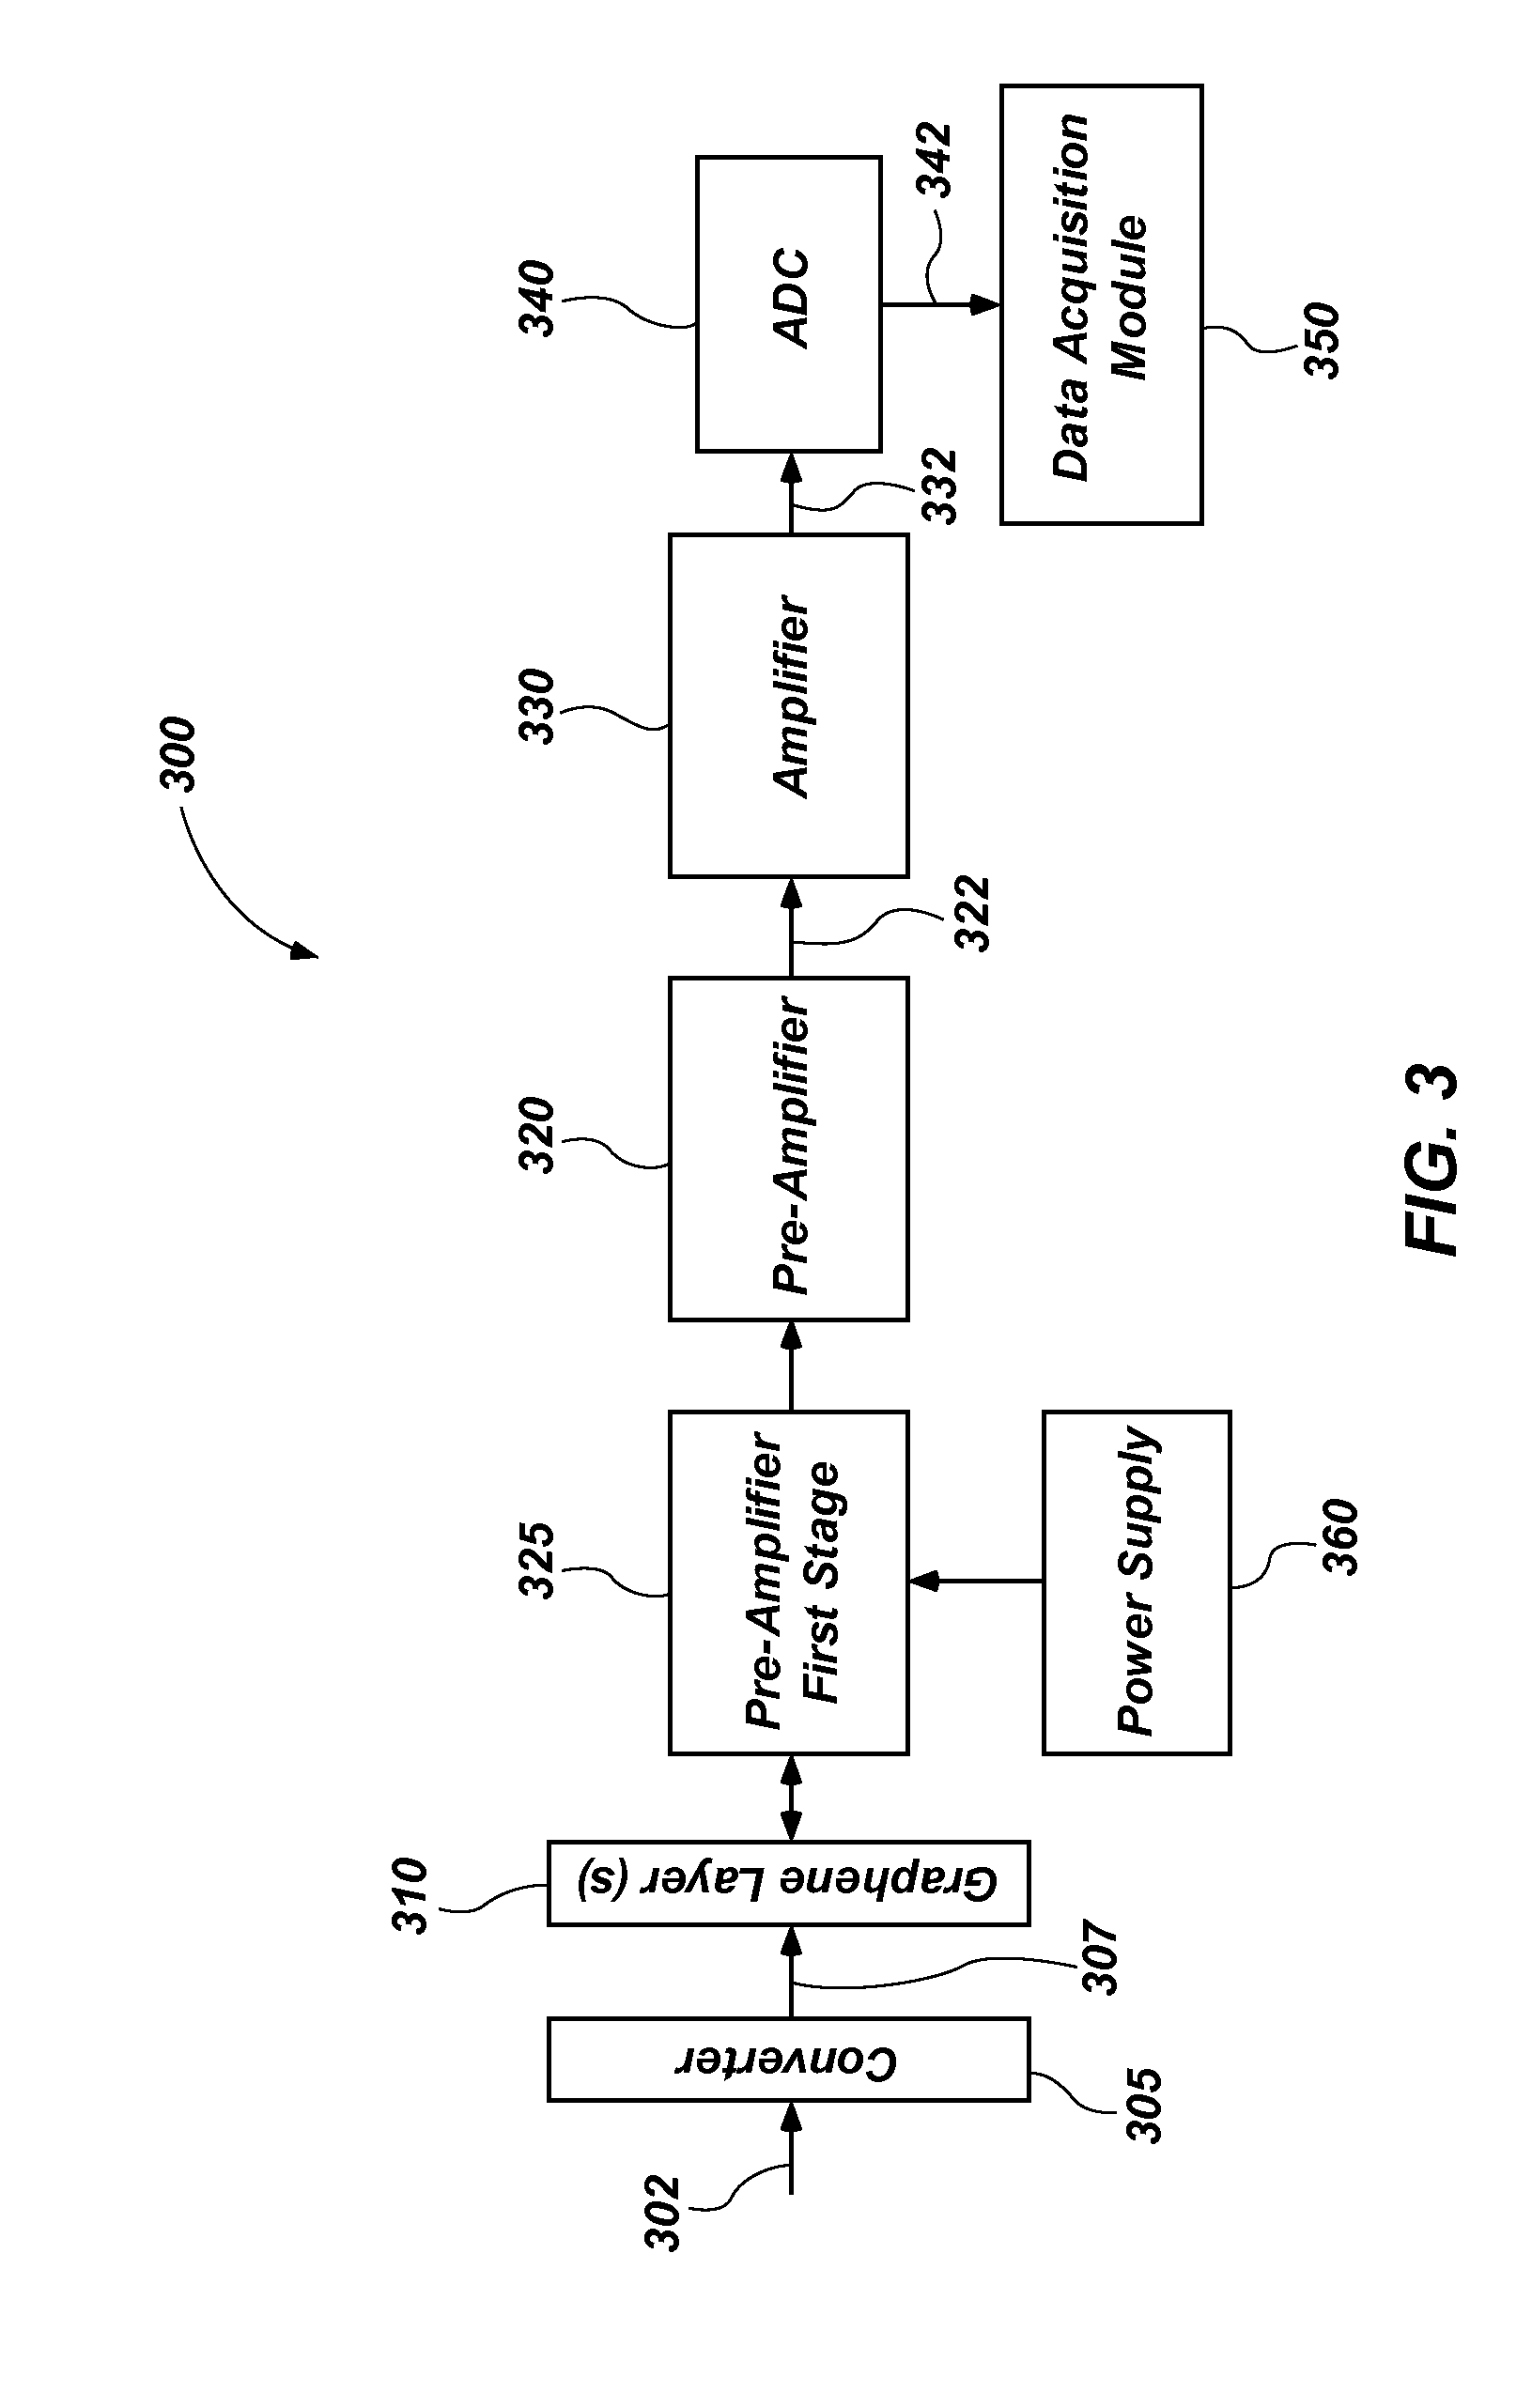 Charged particle detectors with active detector surface for partial energy deposition of the charged particles and related methods